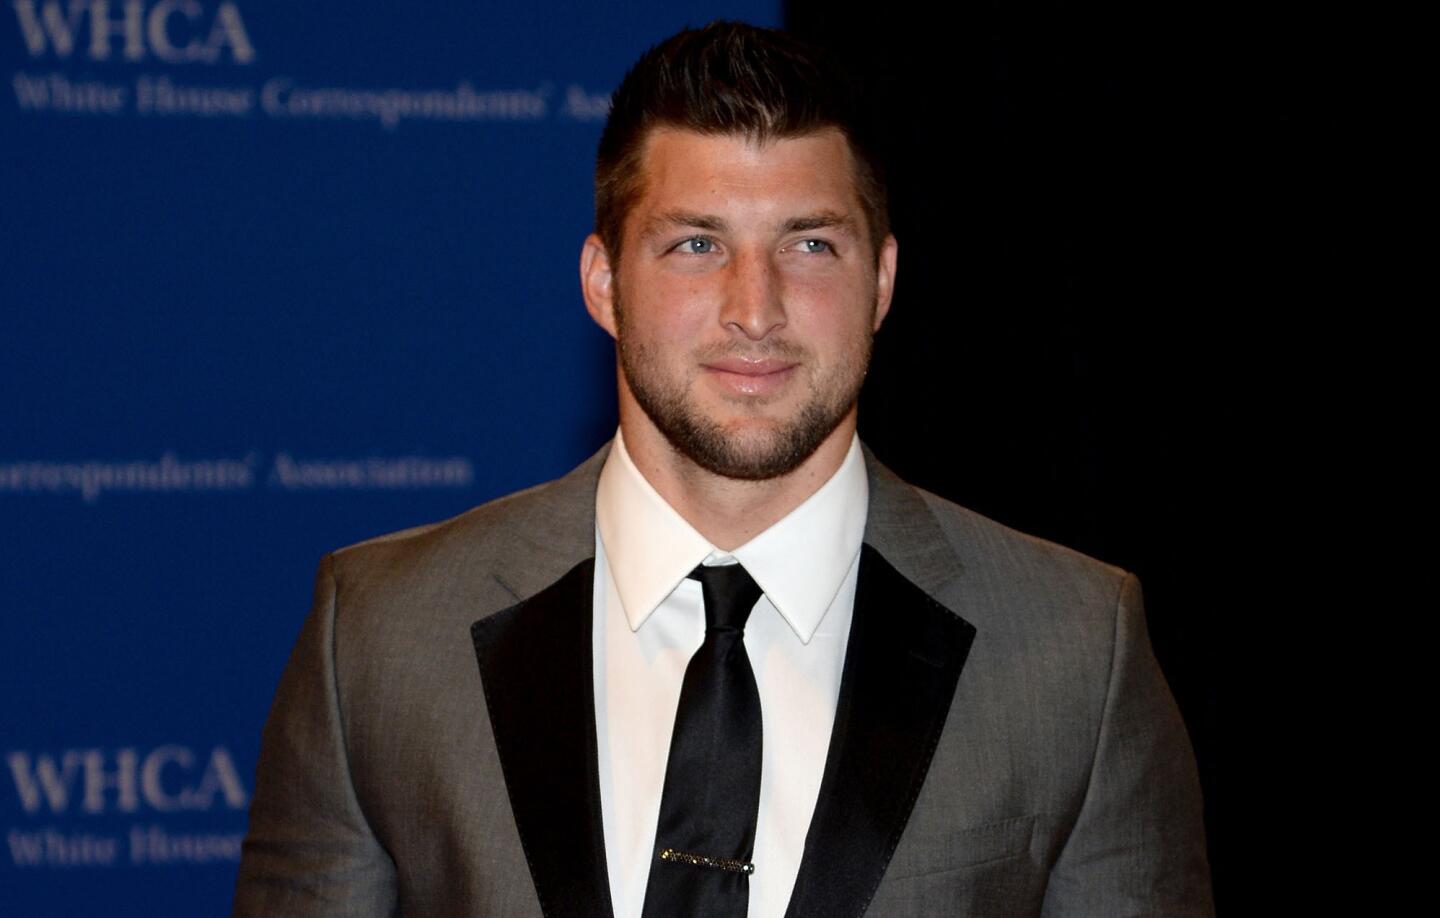 Tebow arrives at the White House